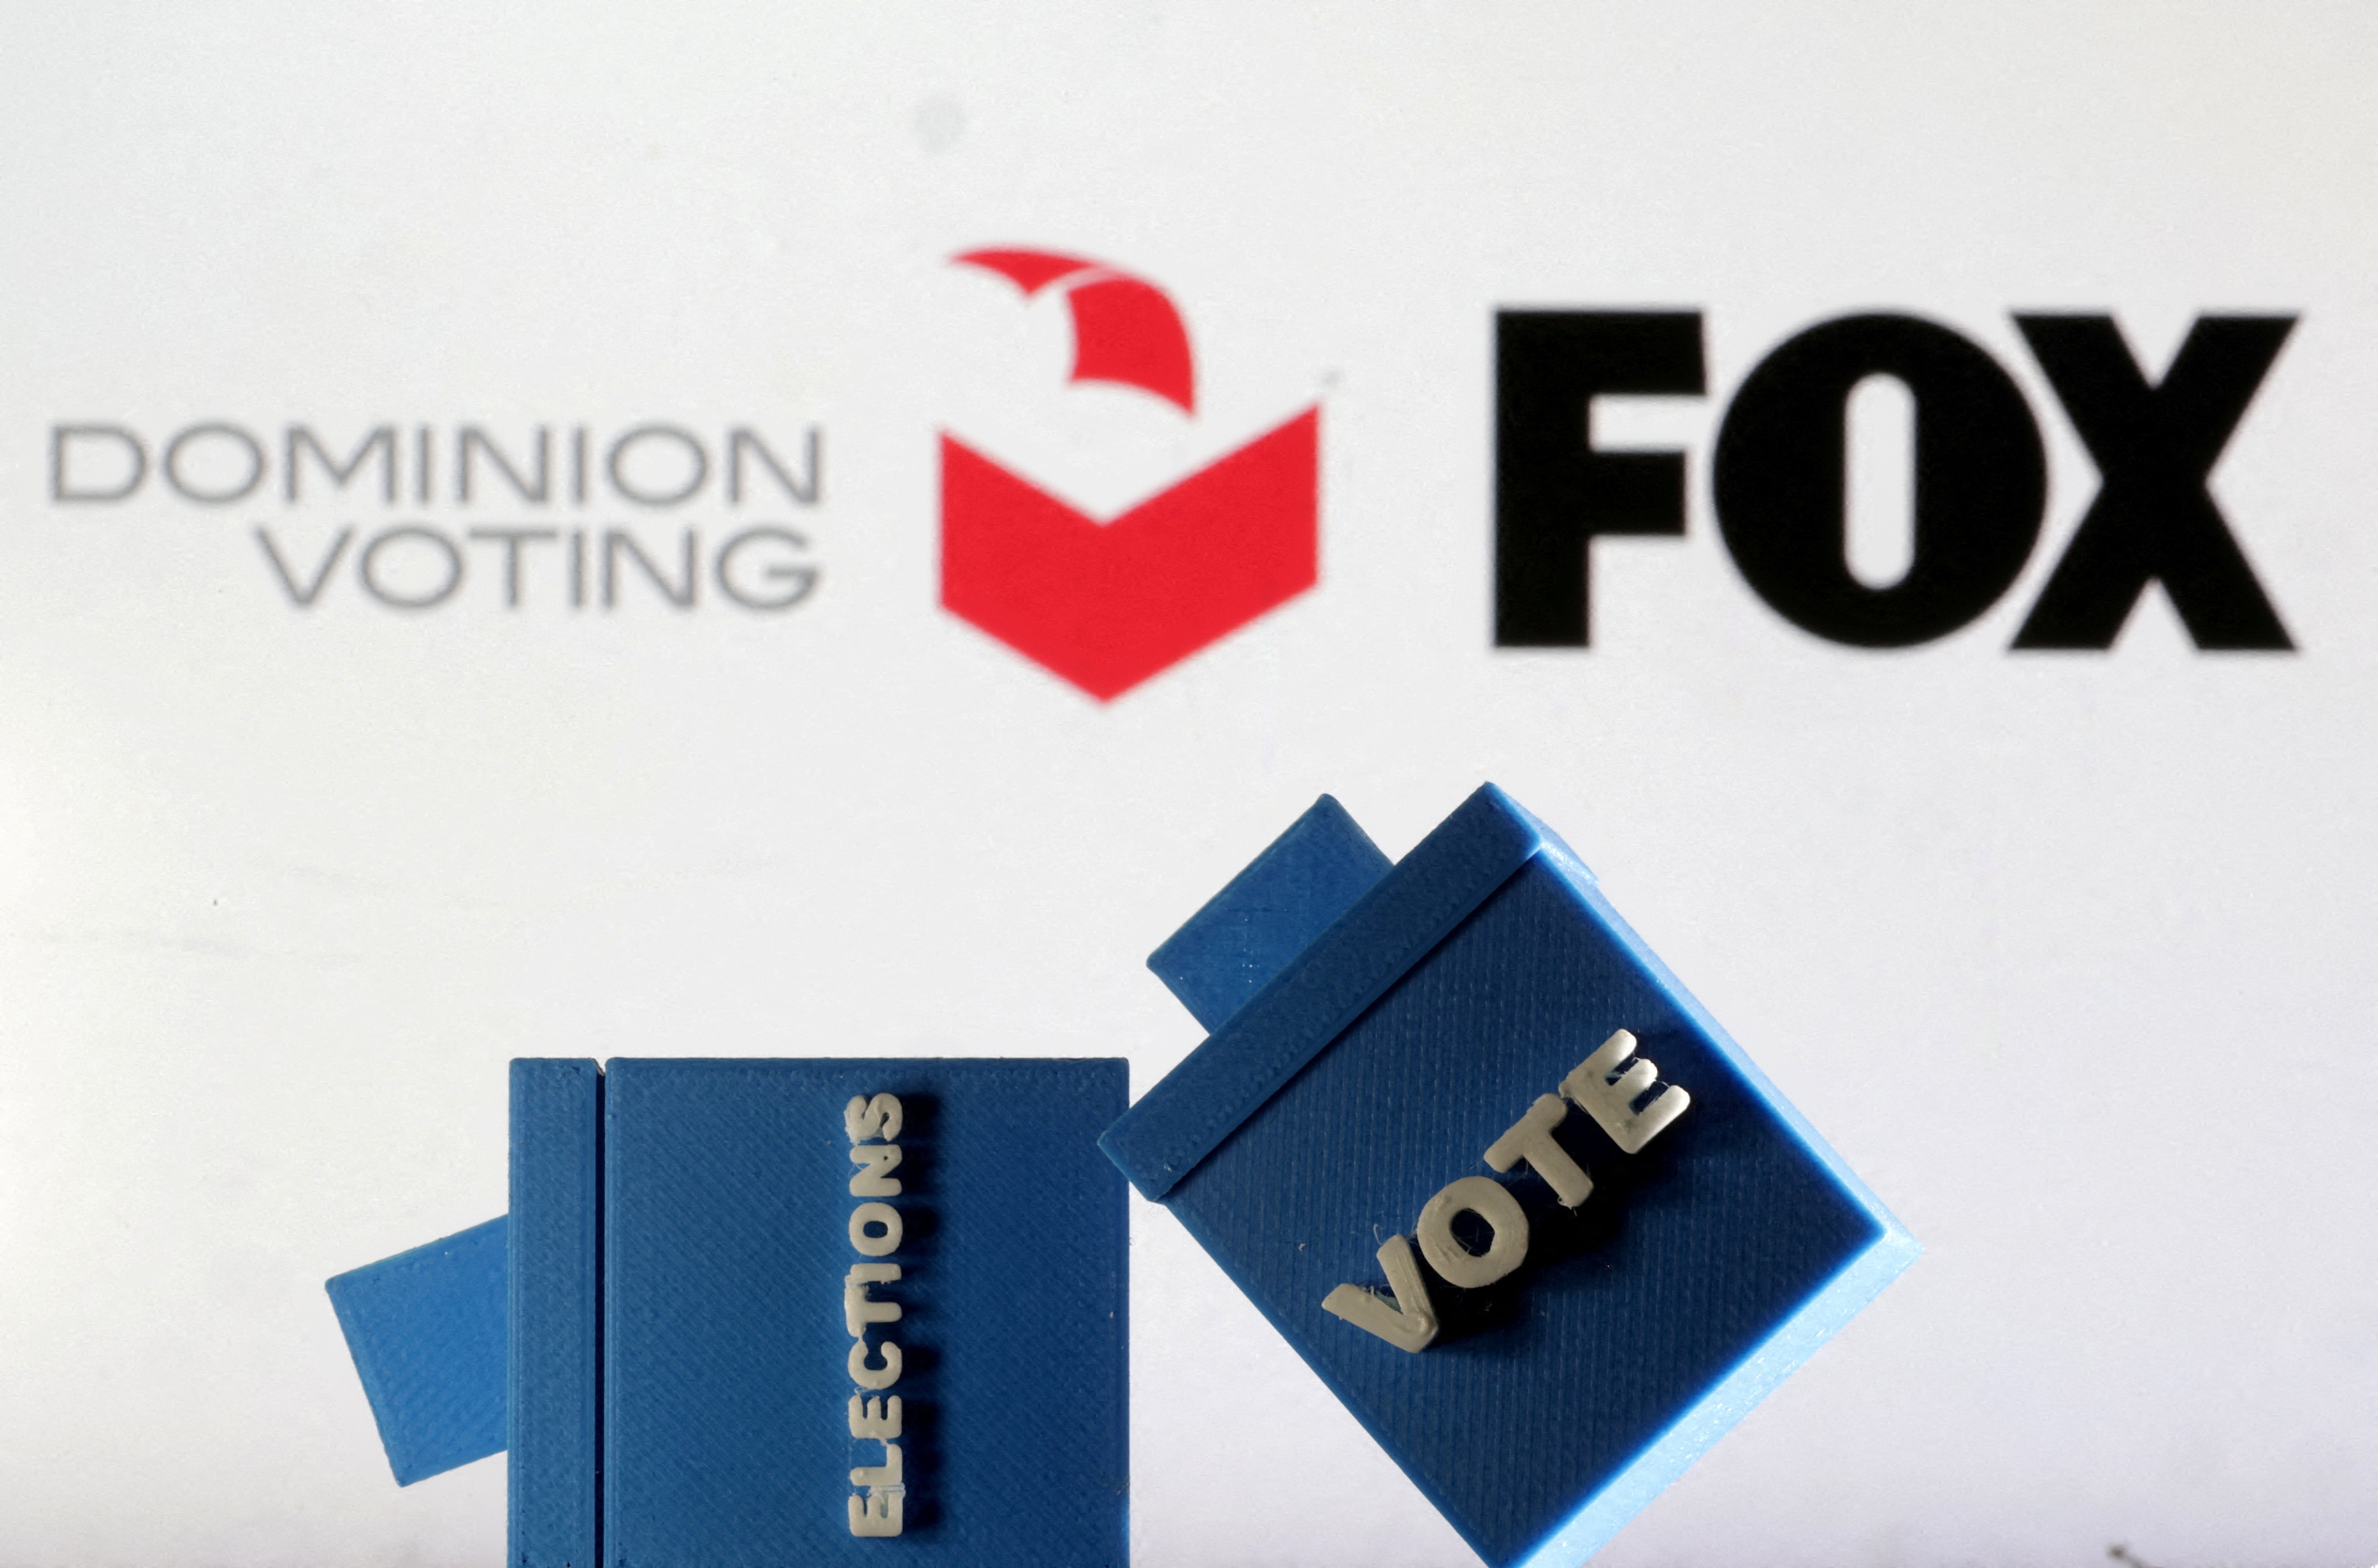 FILE PHOTO: Illustration shows Dominion Voting Systems and Fox logos